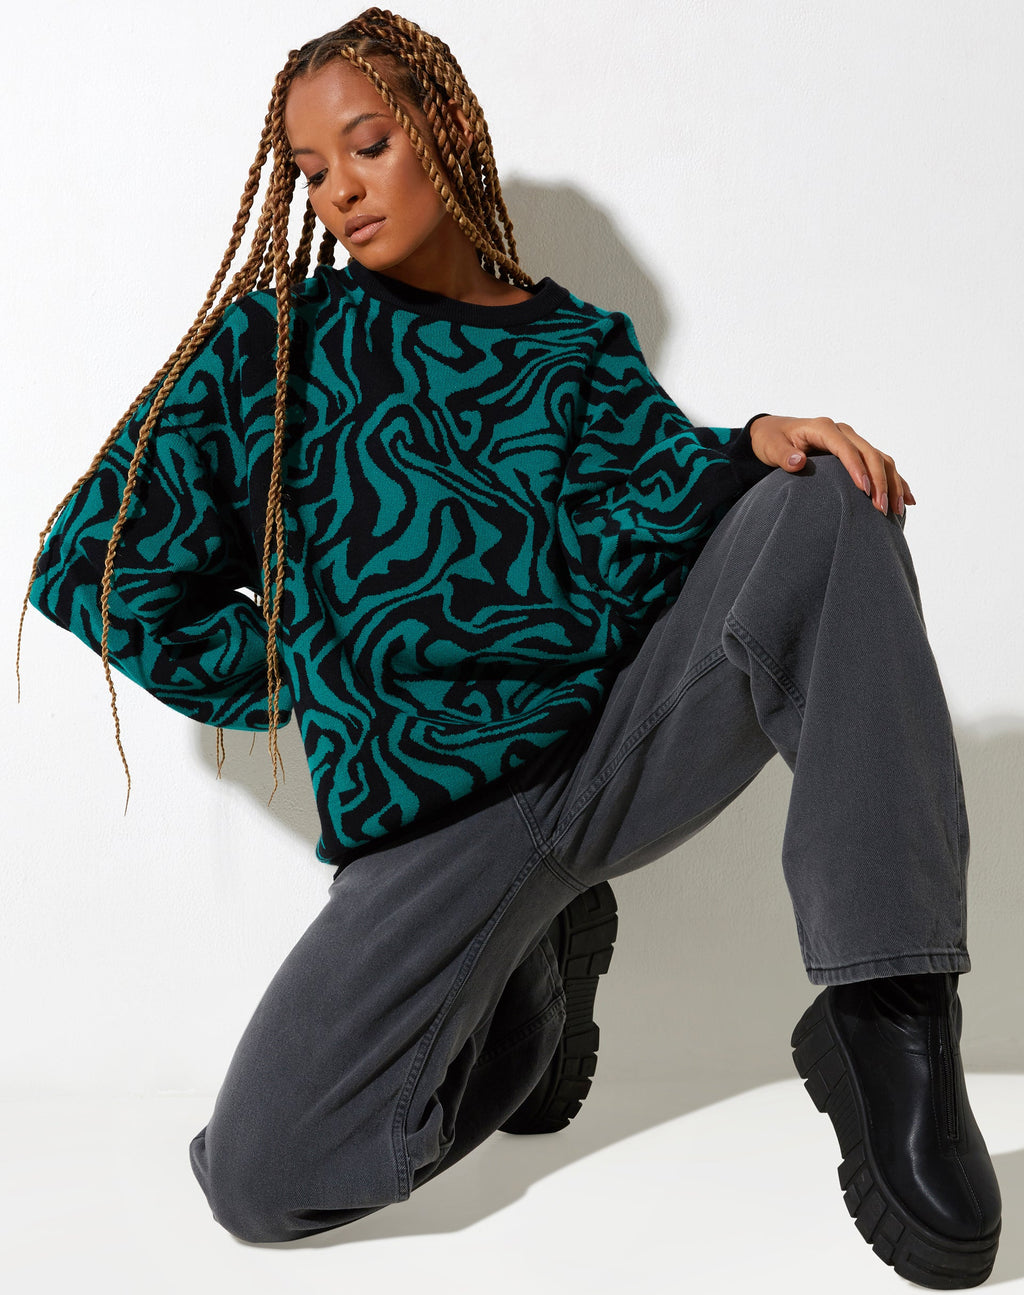 Mably Jumper in Jagged Swirl Green and Black